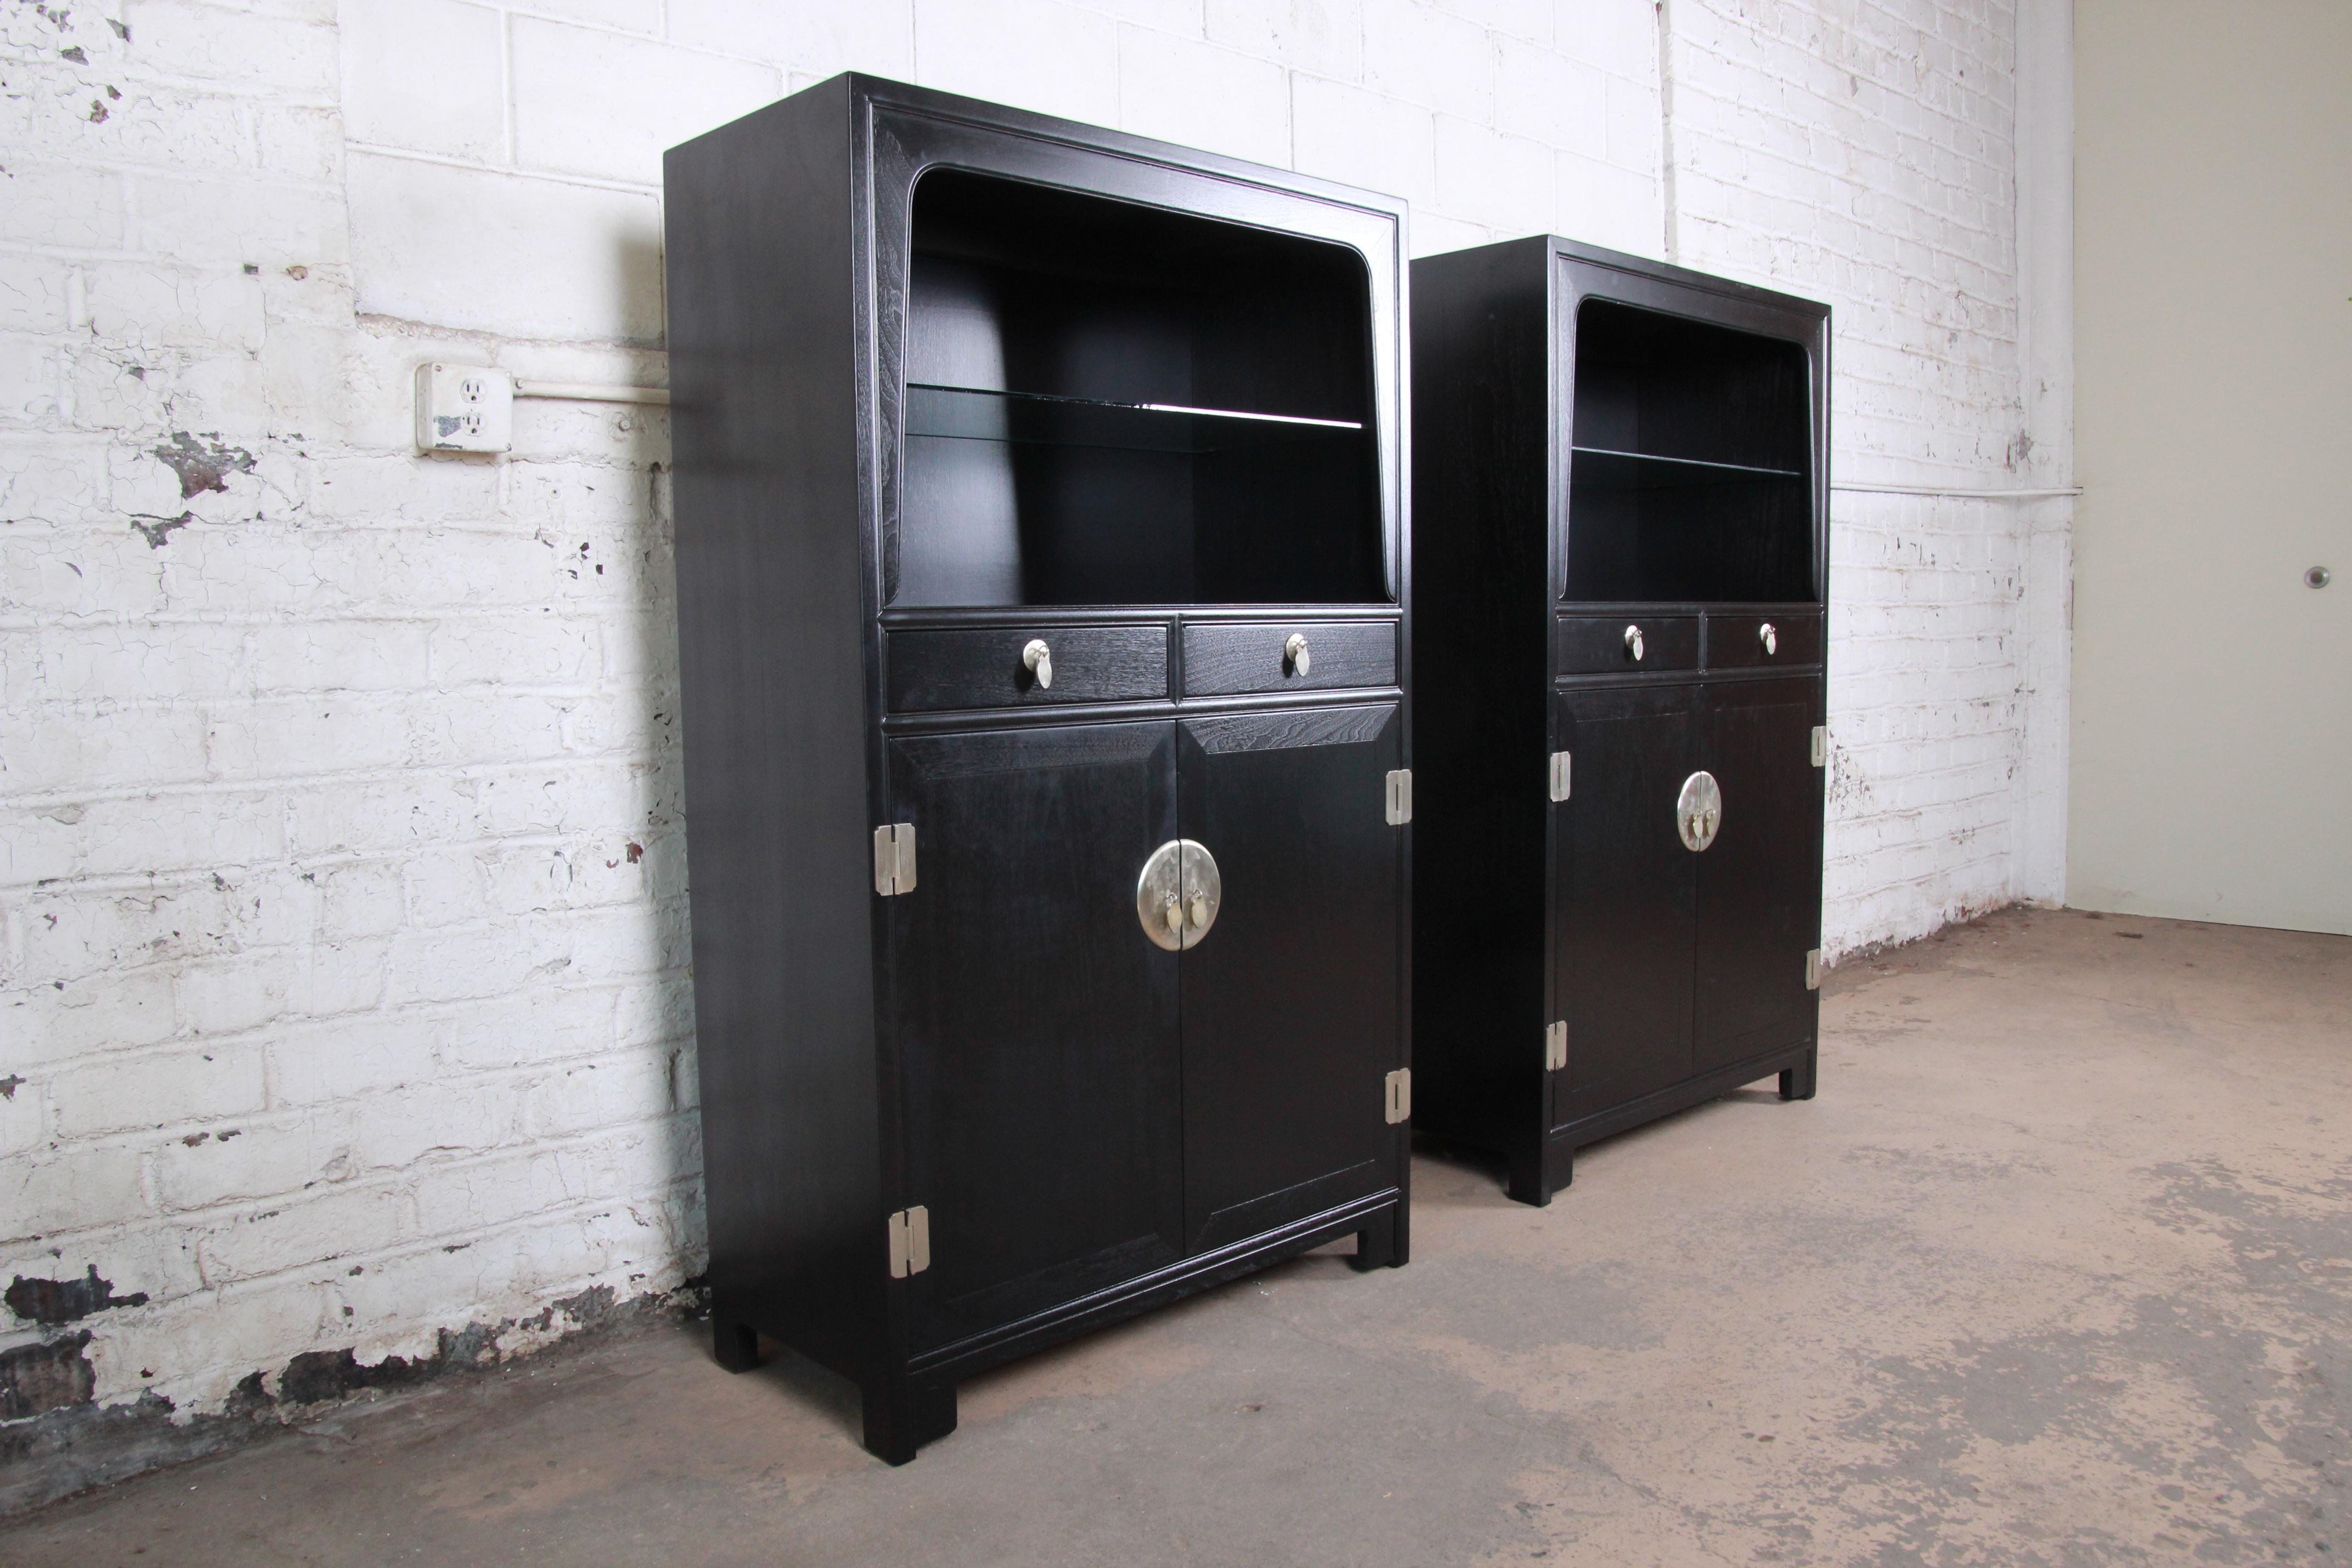 An exceptional pair of chinoiserie wall units or display cabinets from the Far East Collection by Michael Taylor for Baker Furniture. The cabinets feature beautiful walnut wood grain with a newly ebonized finish. They have a simple midcentury